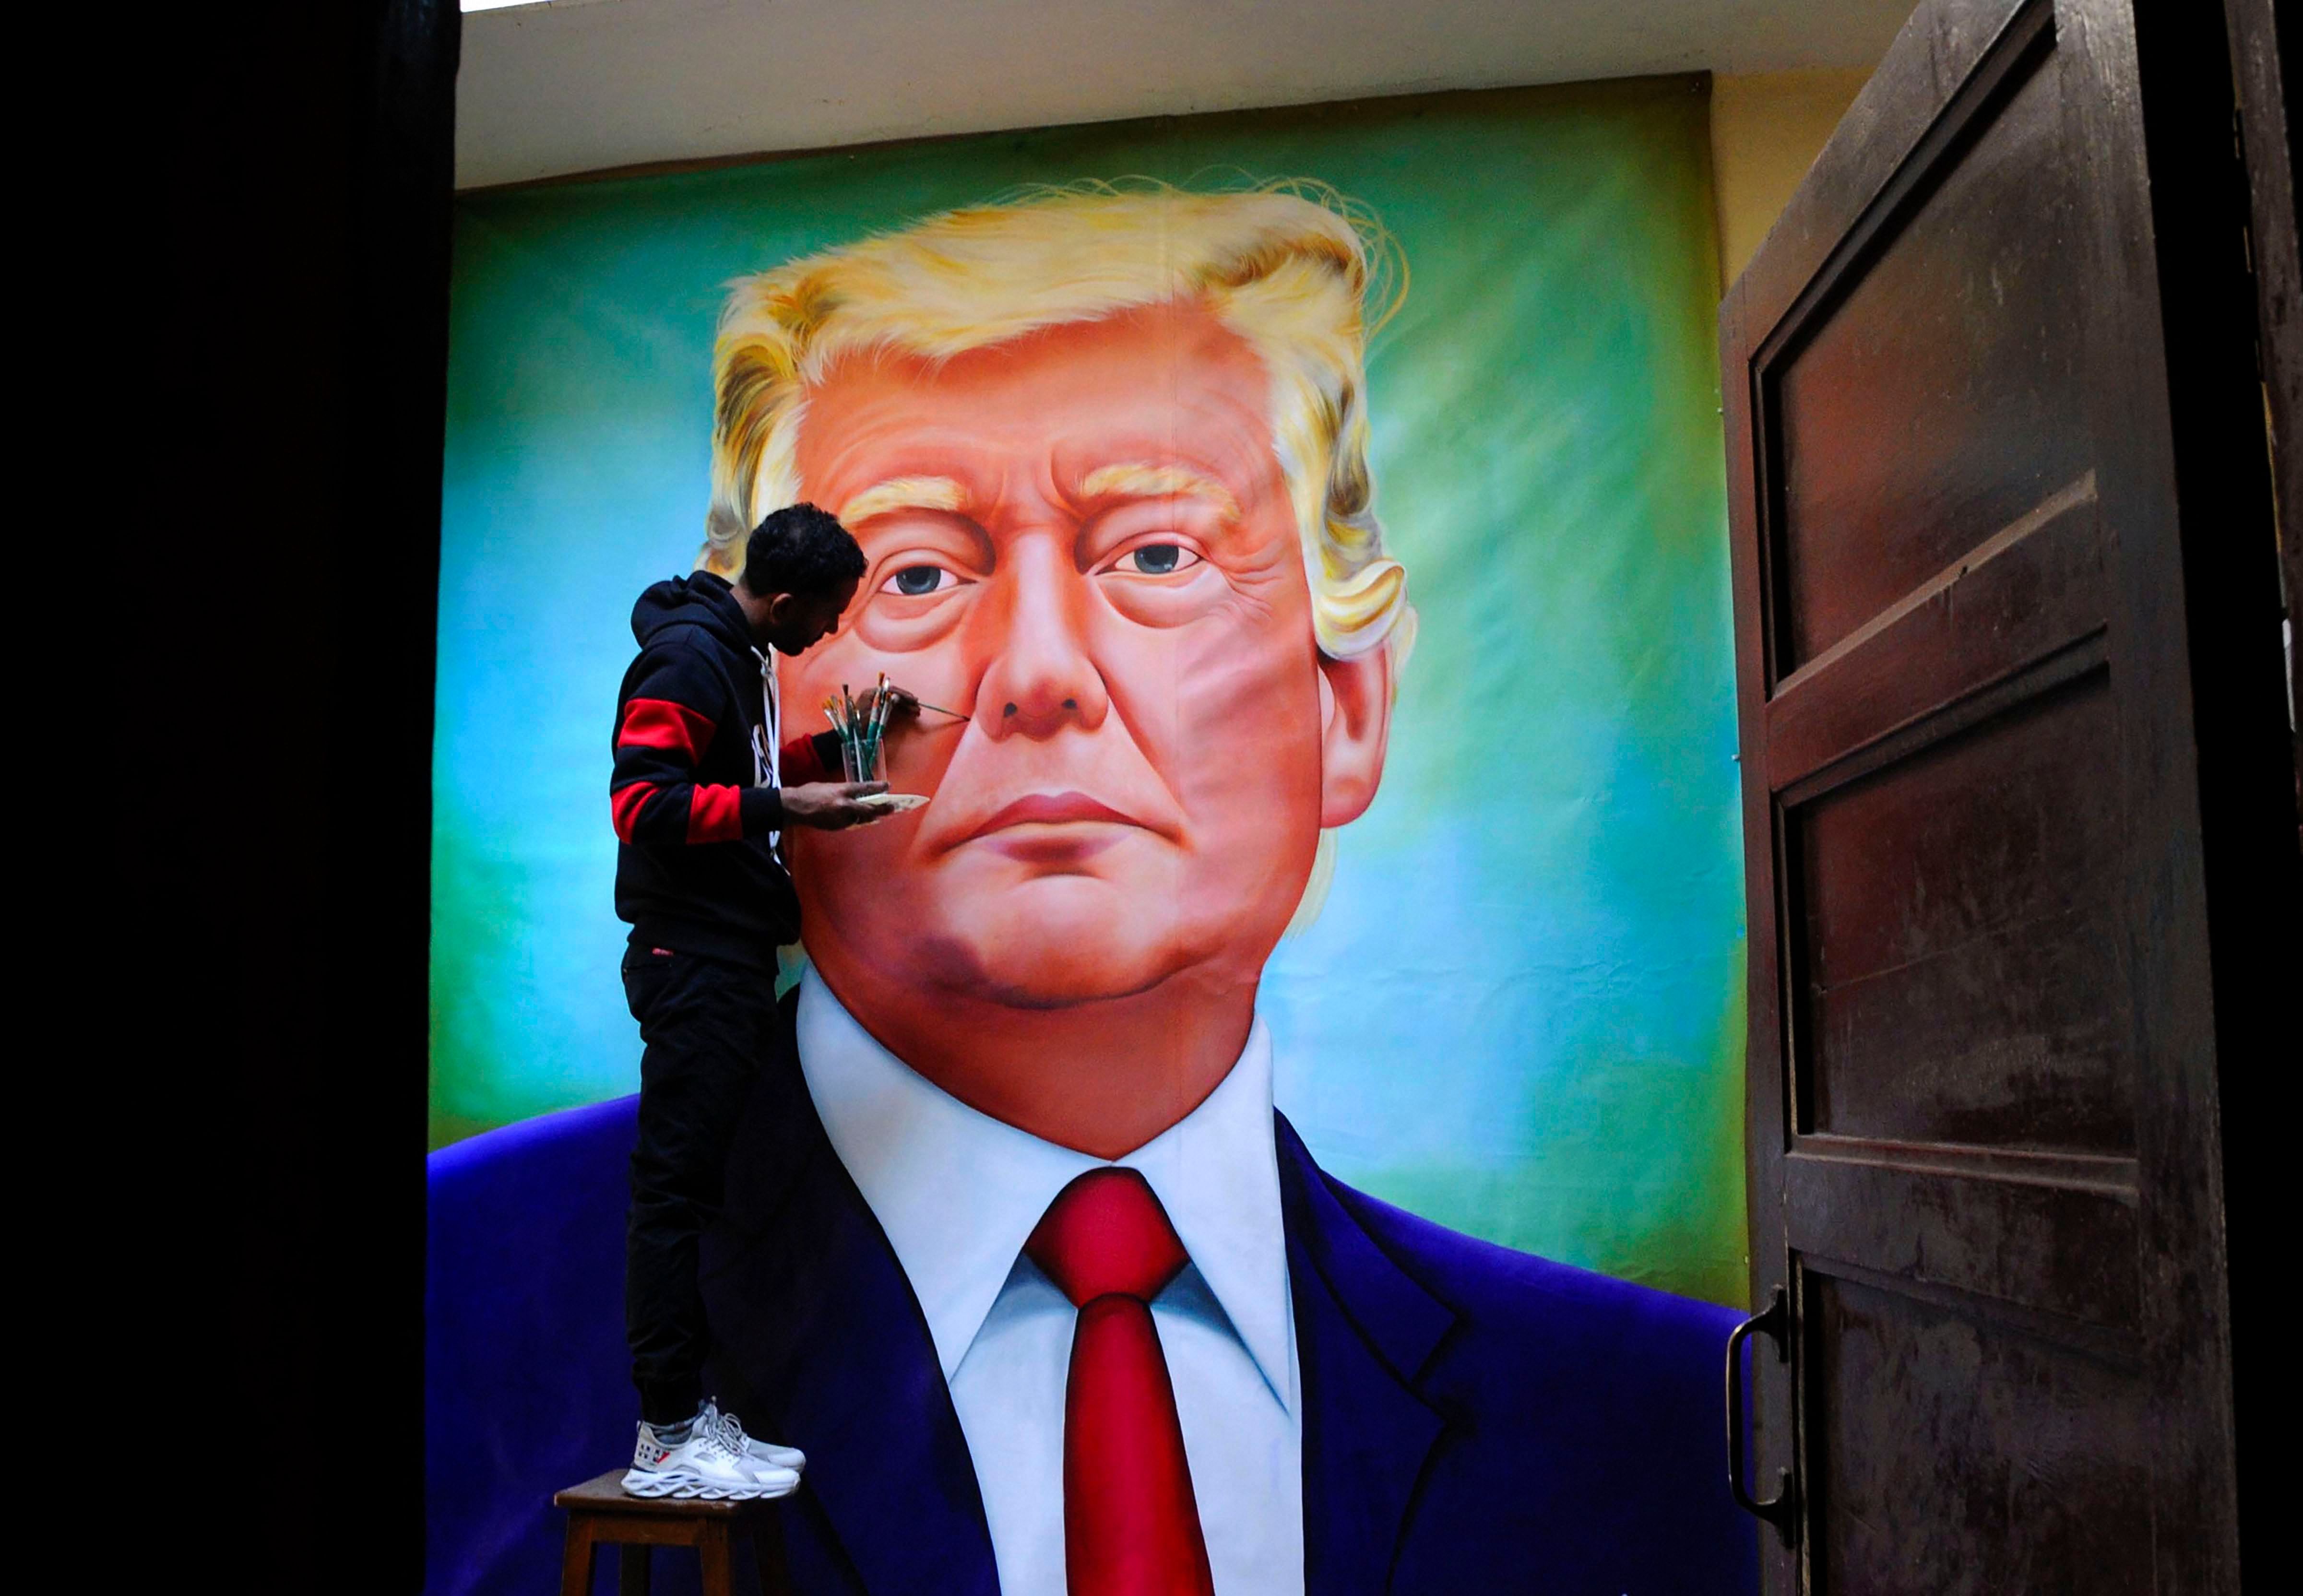 Artist Jagjot Singh Rubal gives final touches to a painting of US President Donald Trump. (PTI Photo)